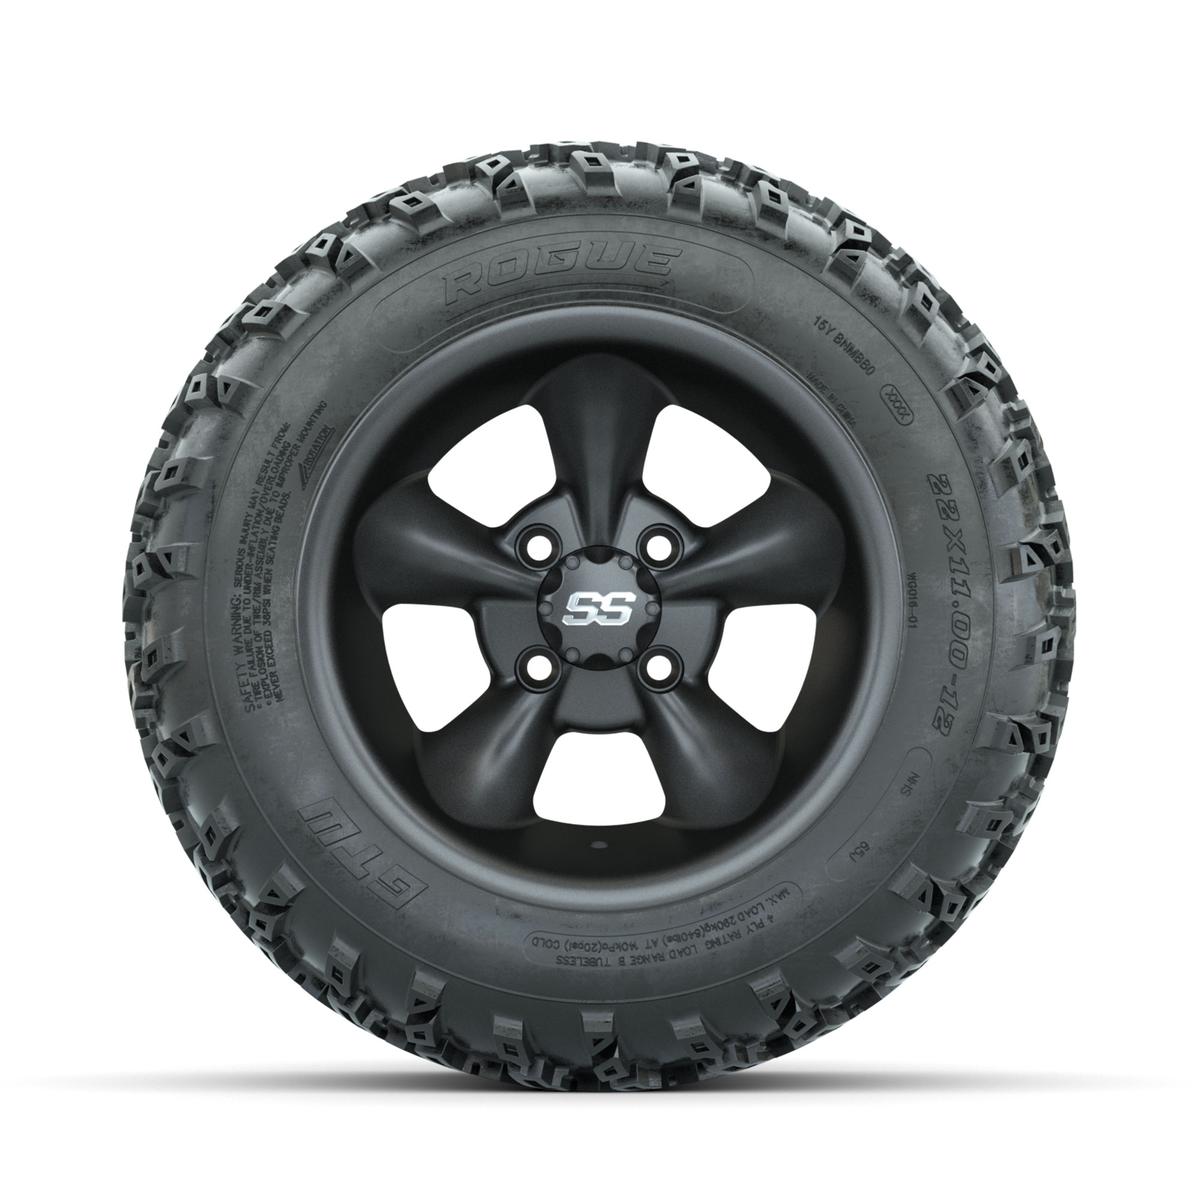 GTW Godfather Matte Grey 12 in Wheels with 22x11.00-12 Rogue All Terrain Tires – Full Set